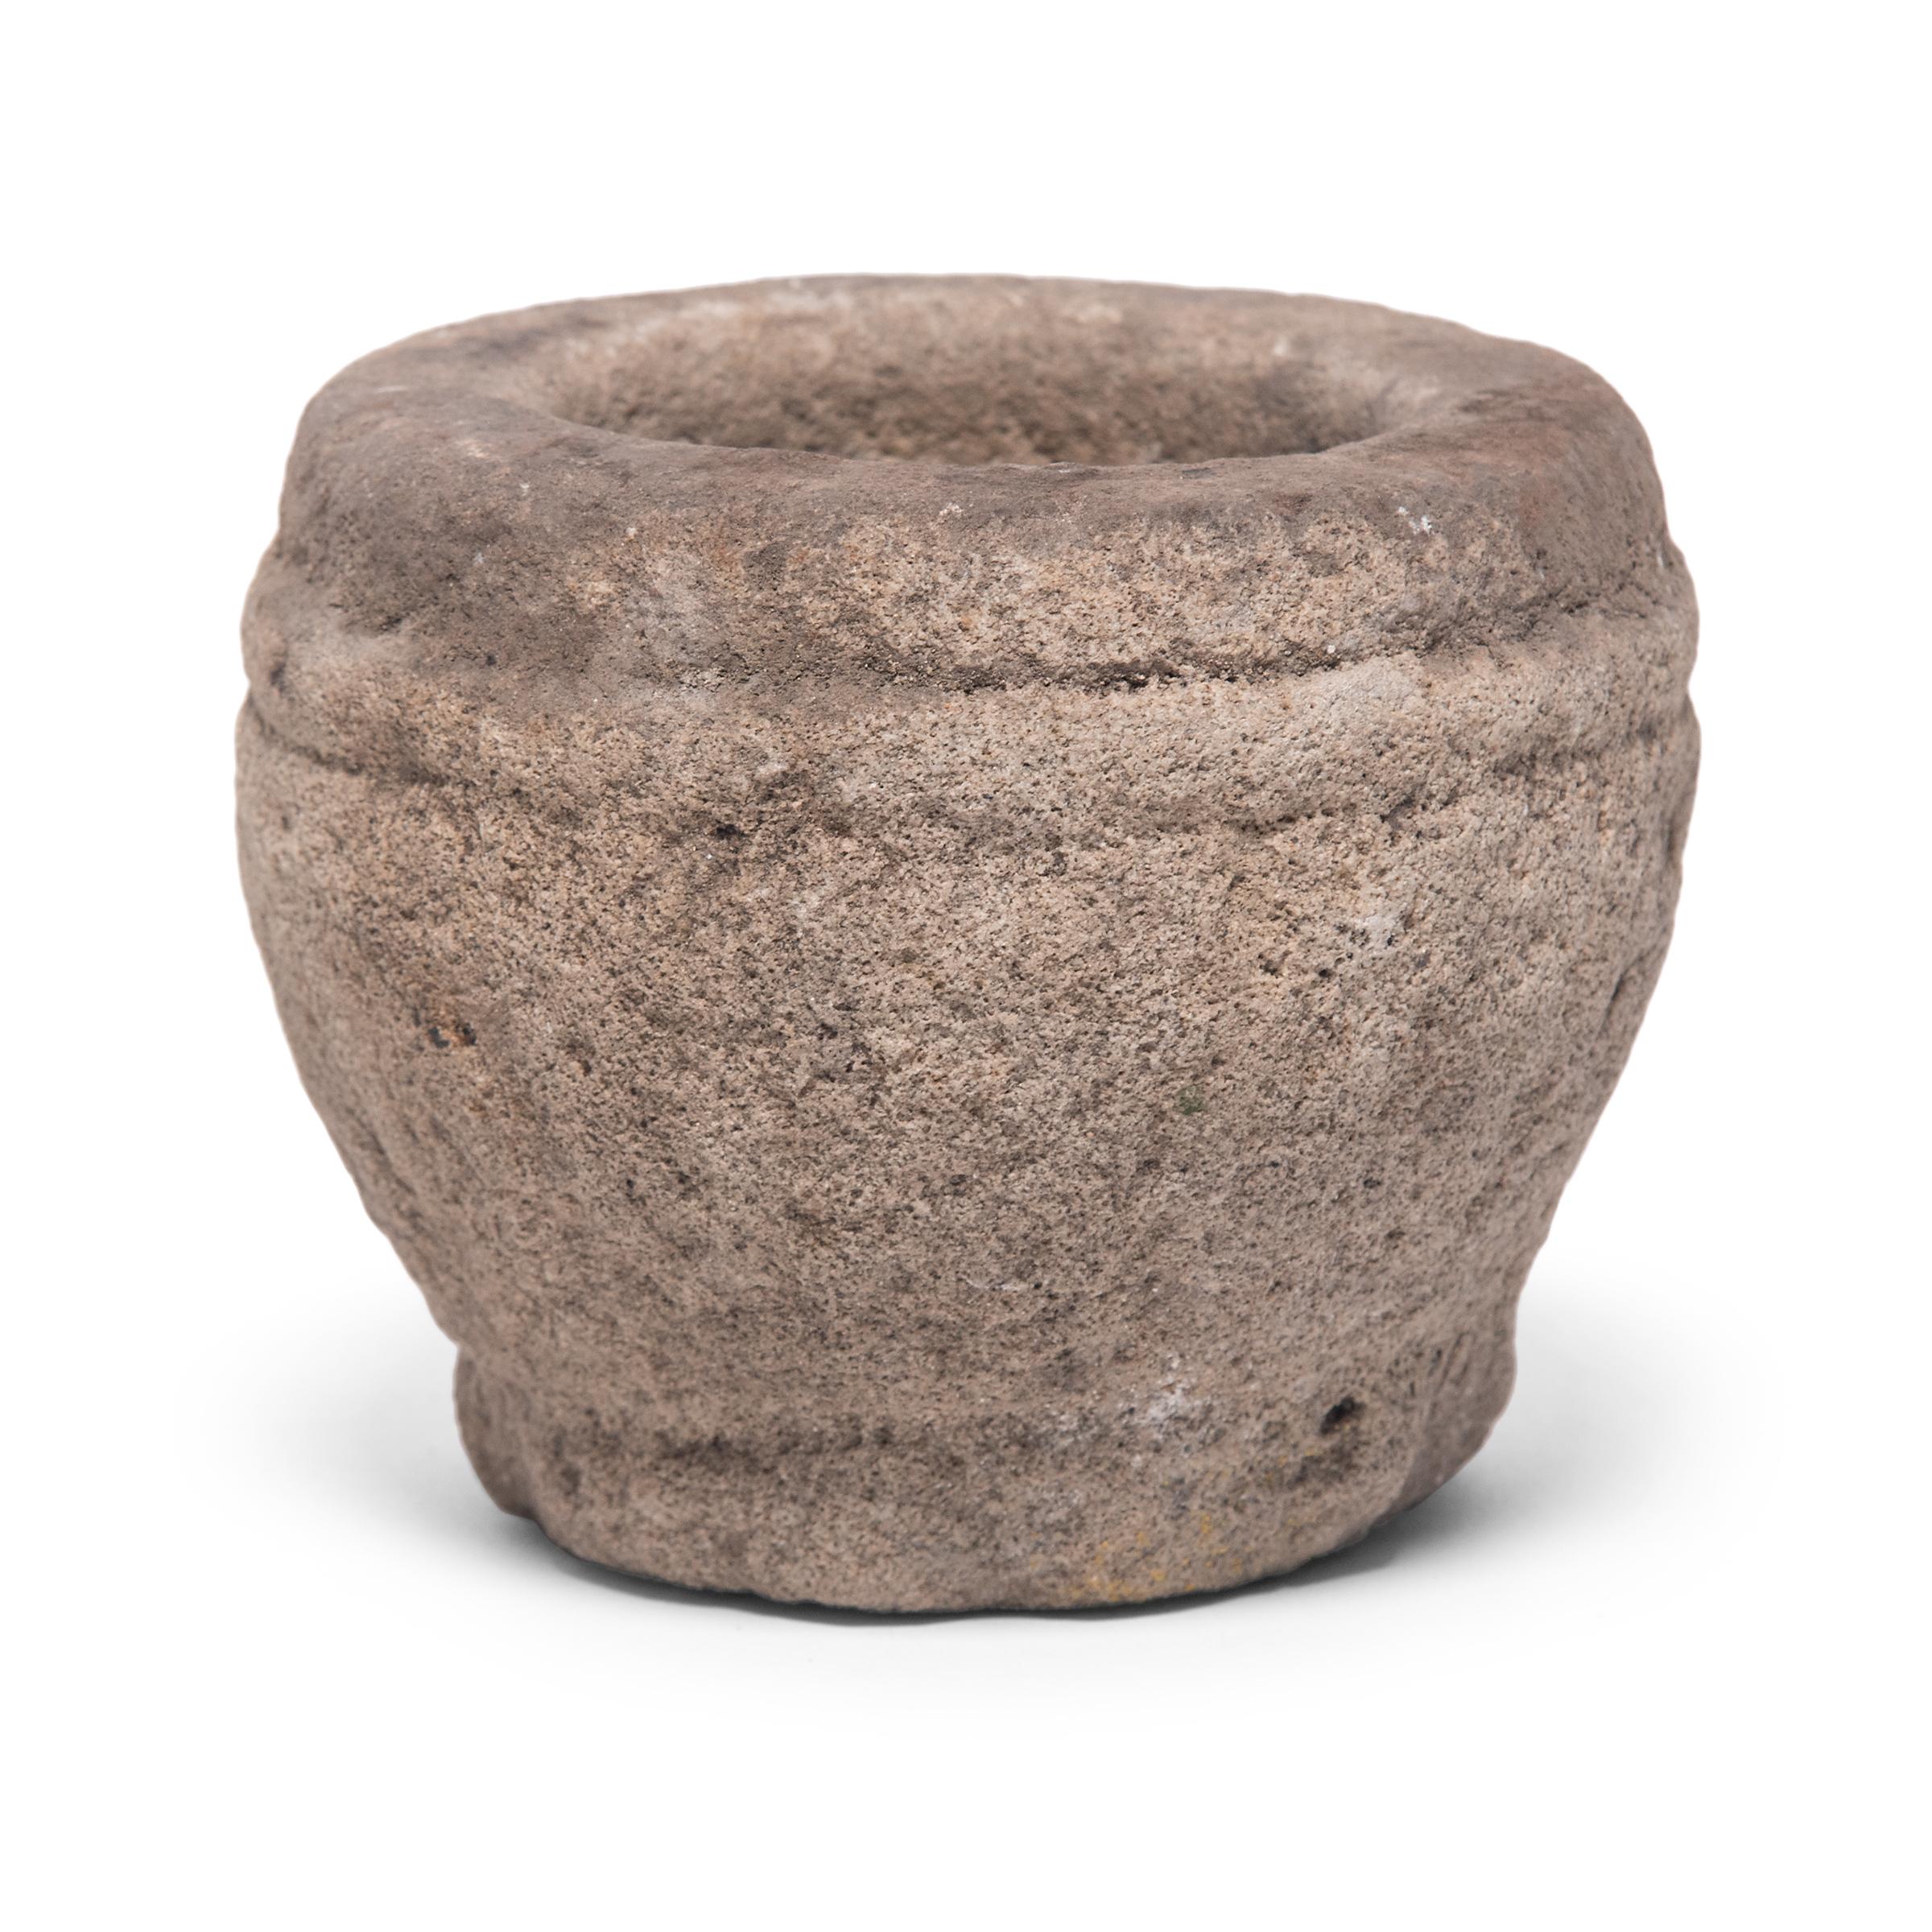 Hand carved from a single block of limestone, this round stone vessel is an early 20th century mortar once used daily in a provincial kitchen to grind herbs, spices, and other foods. Used as a decorative vessel or tabletop planter, the mortar's